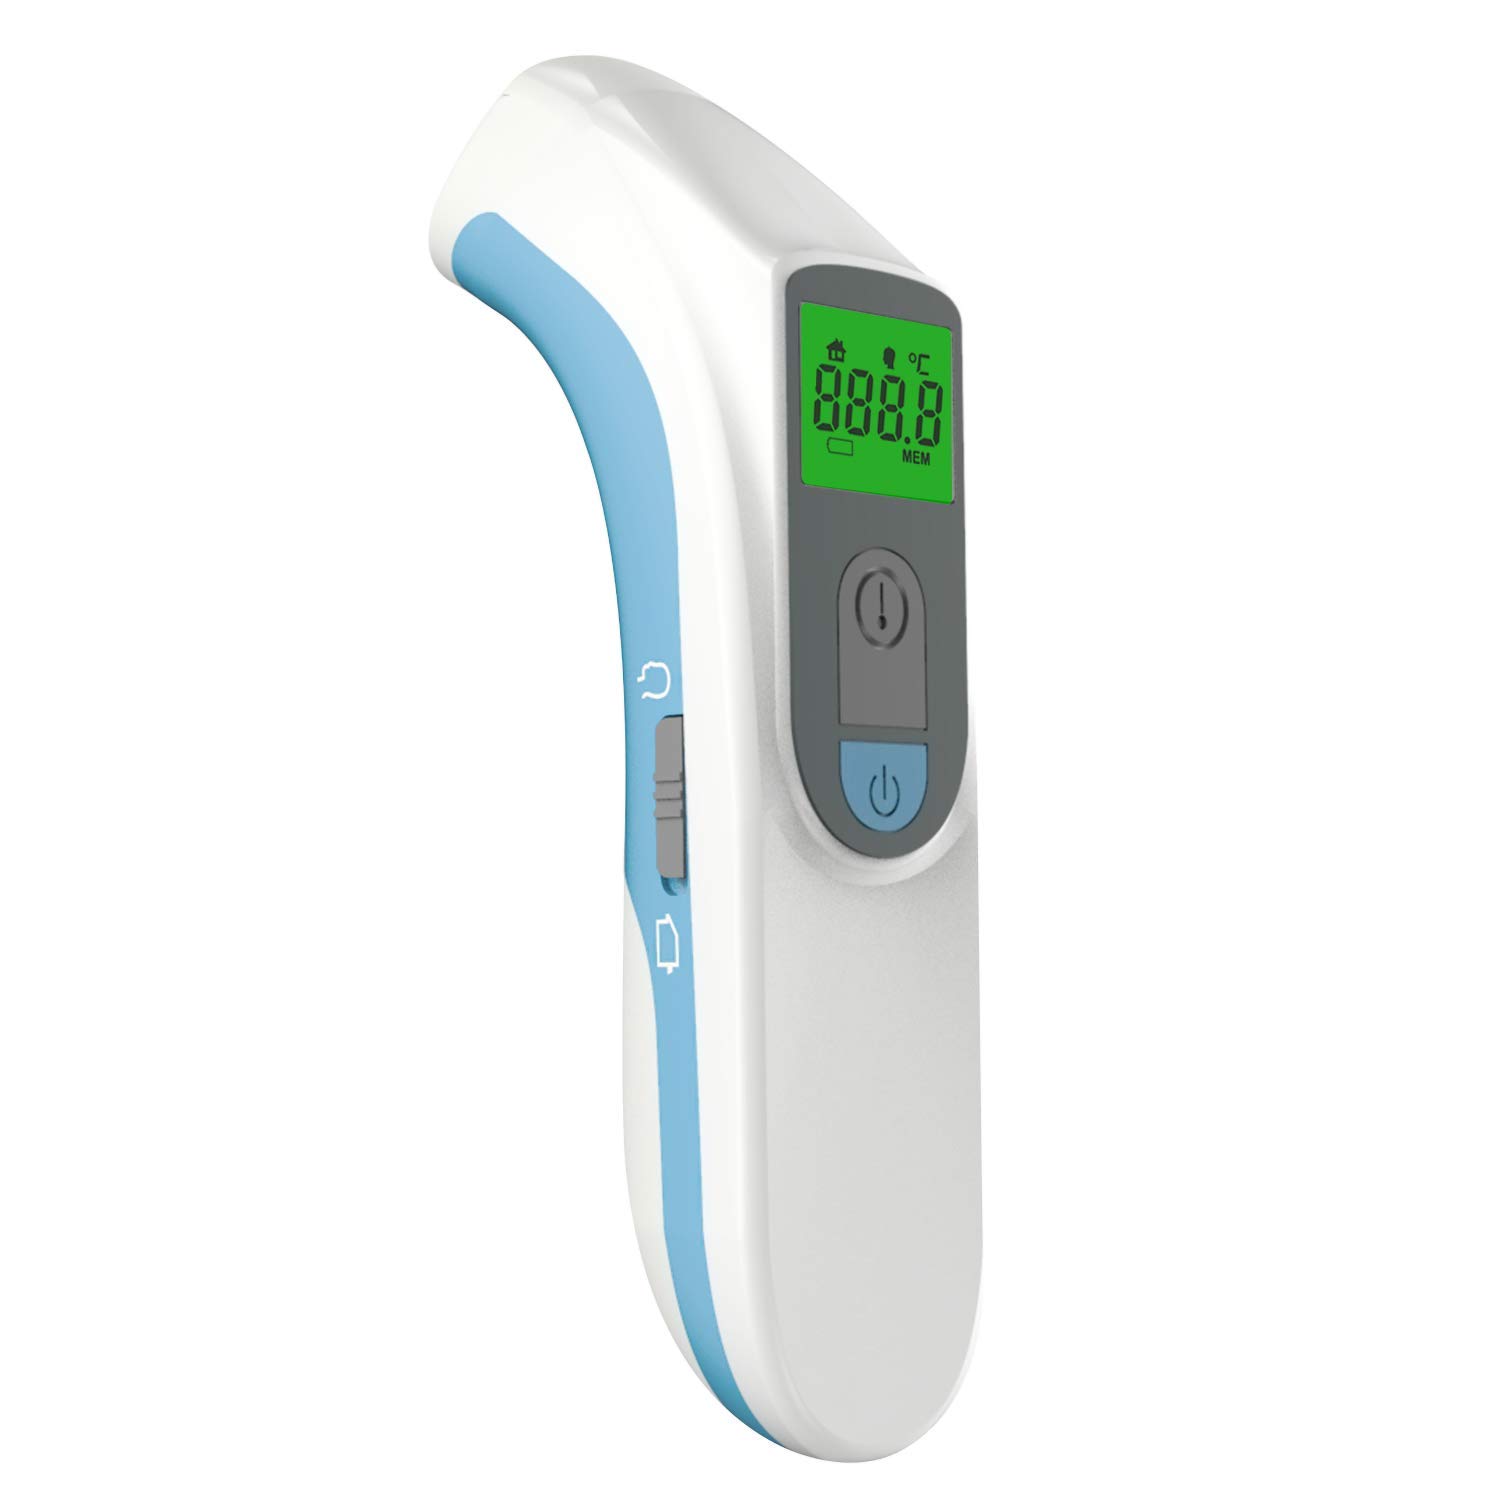  Jumper Medical Forehead Thermometer, Non Contact Thermometer  for Forehead and Object Surface Measurement with Instant Reading and Fever  Warning for Kids and Adults (Sky Blue) : Health & Household